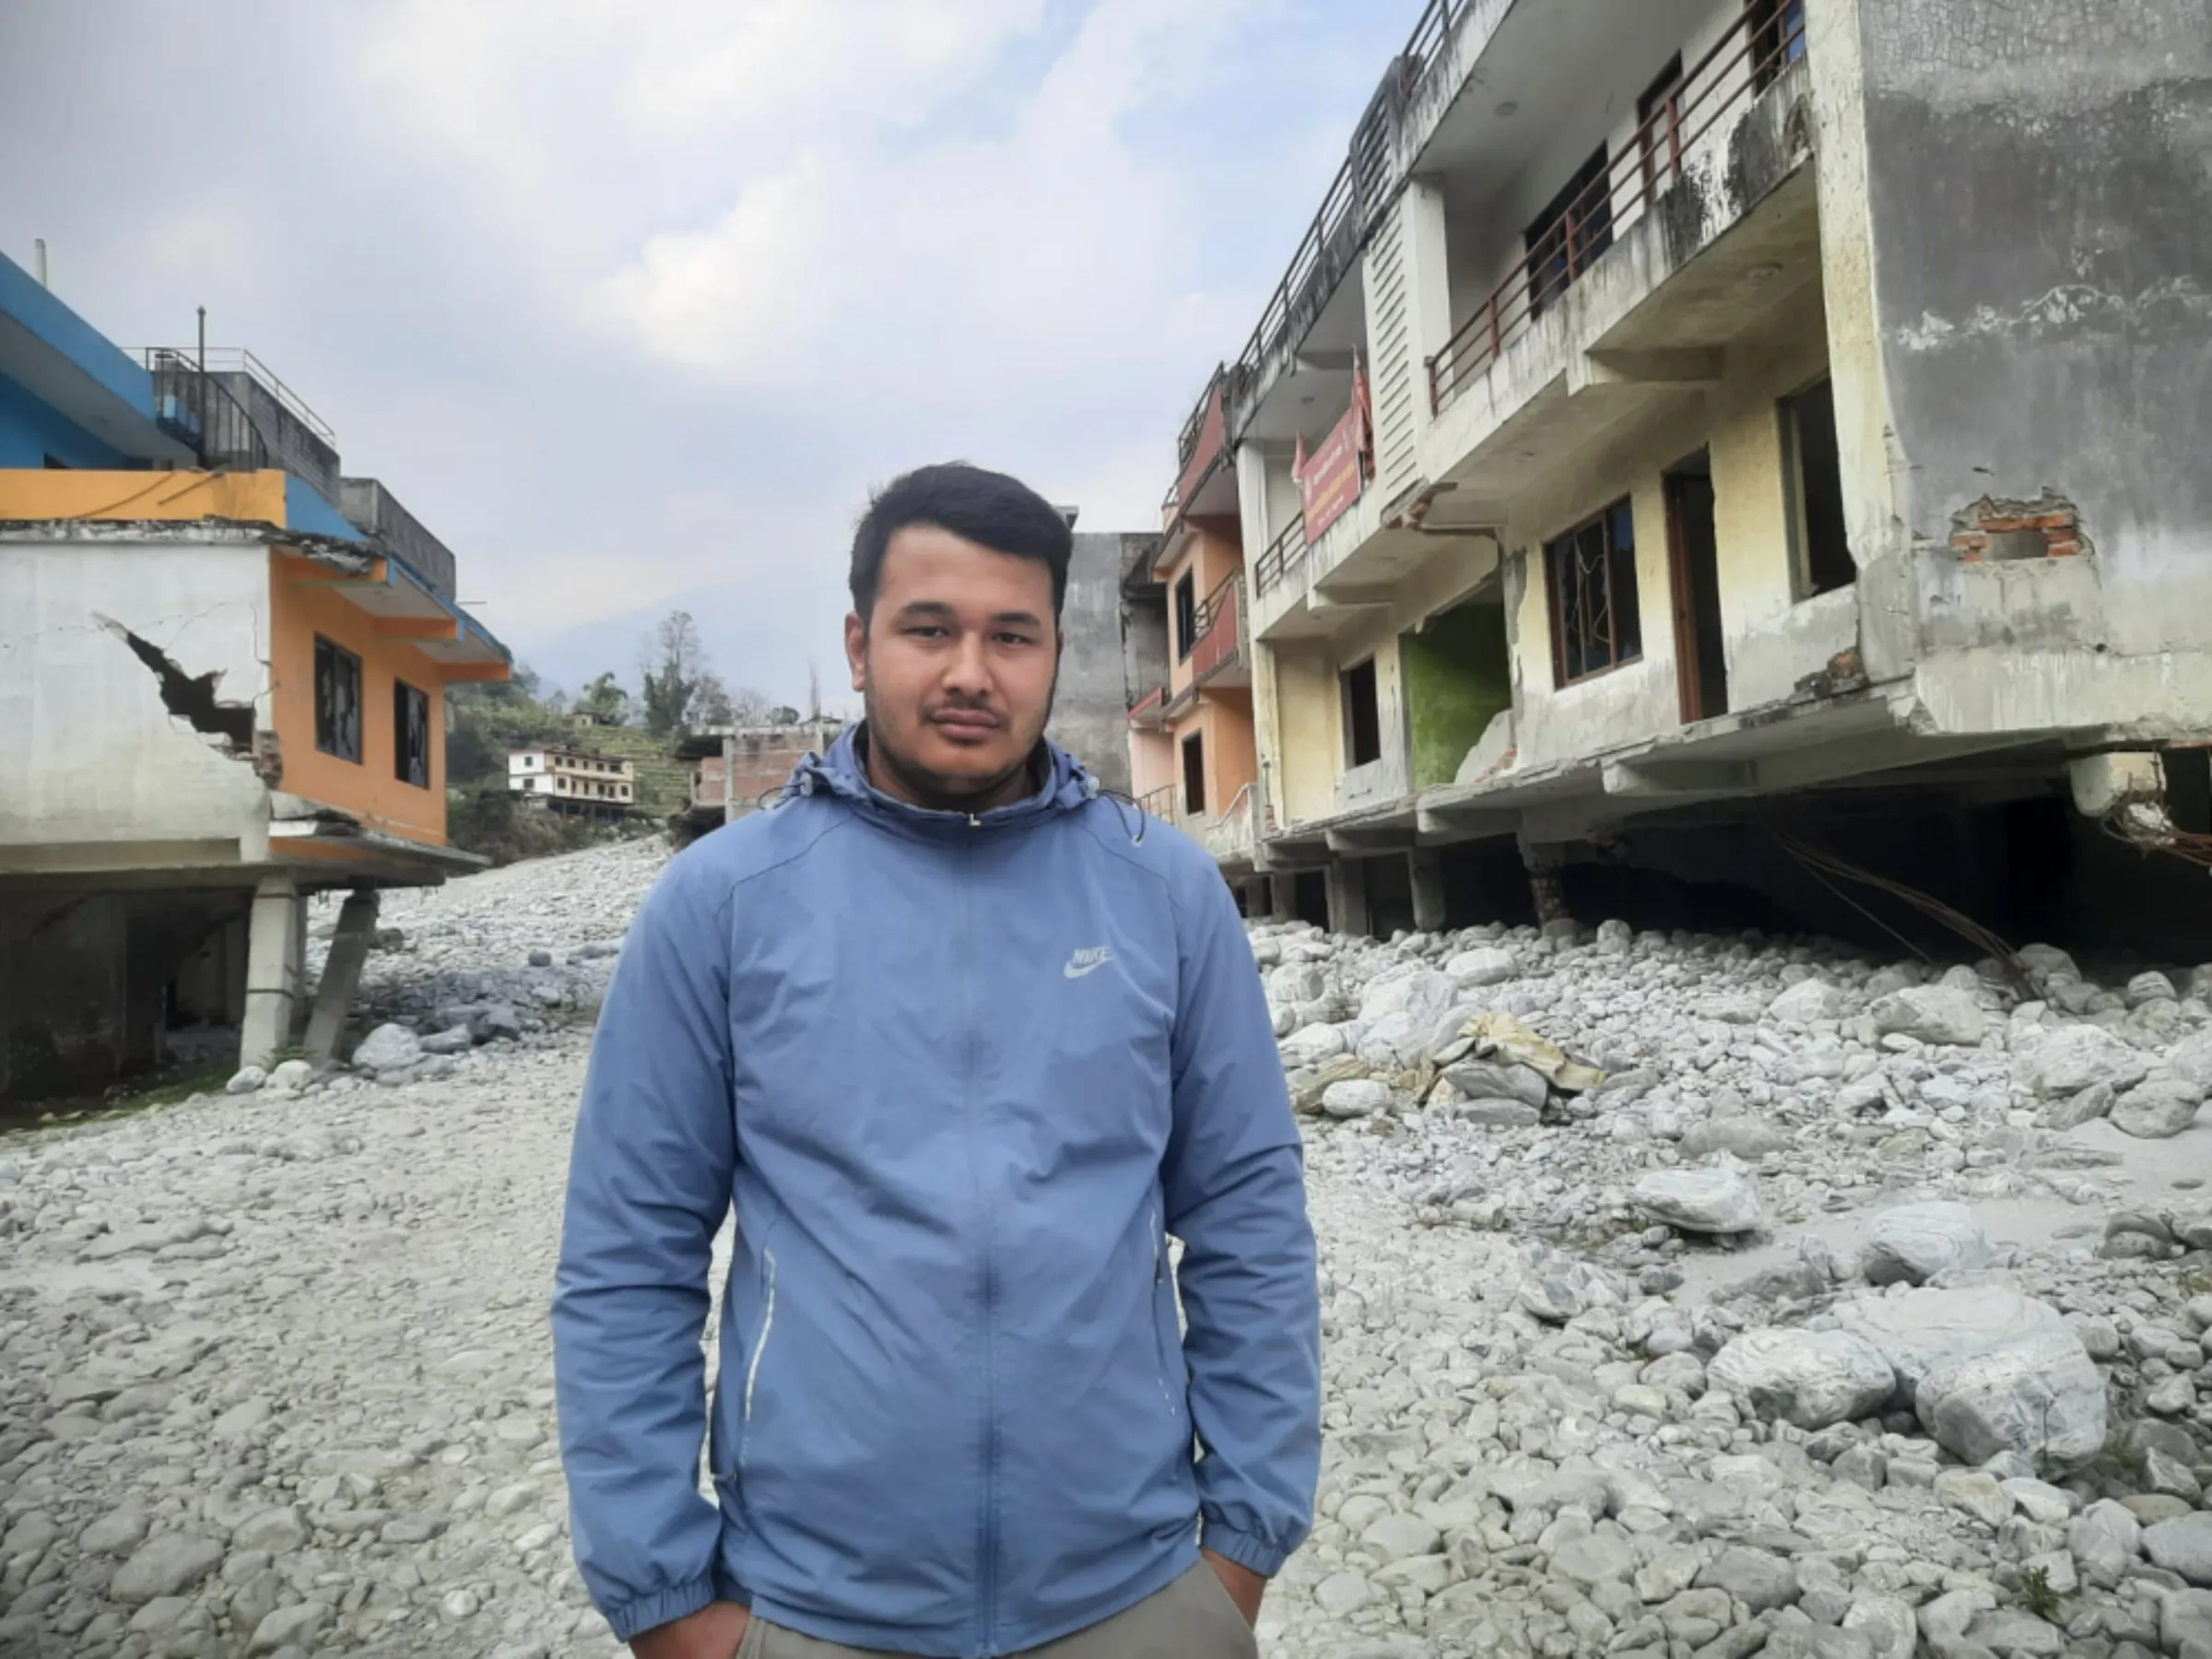 Upendra Kachhapati, the son of Gynendra Kachhapati, who lost his life in a glacial lake outburst flood on the Melamchi river, stands at the site of the flood, February 18, 2023